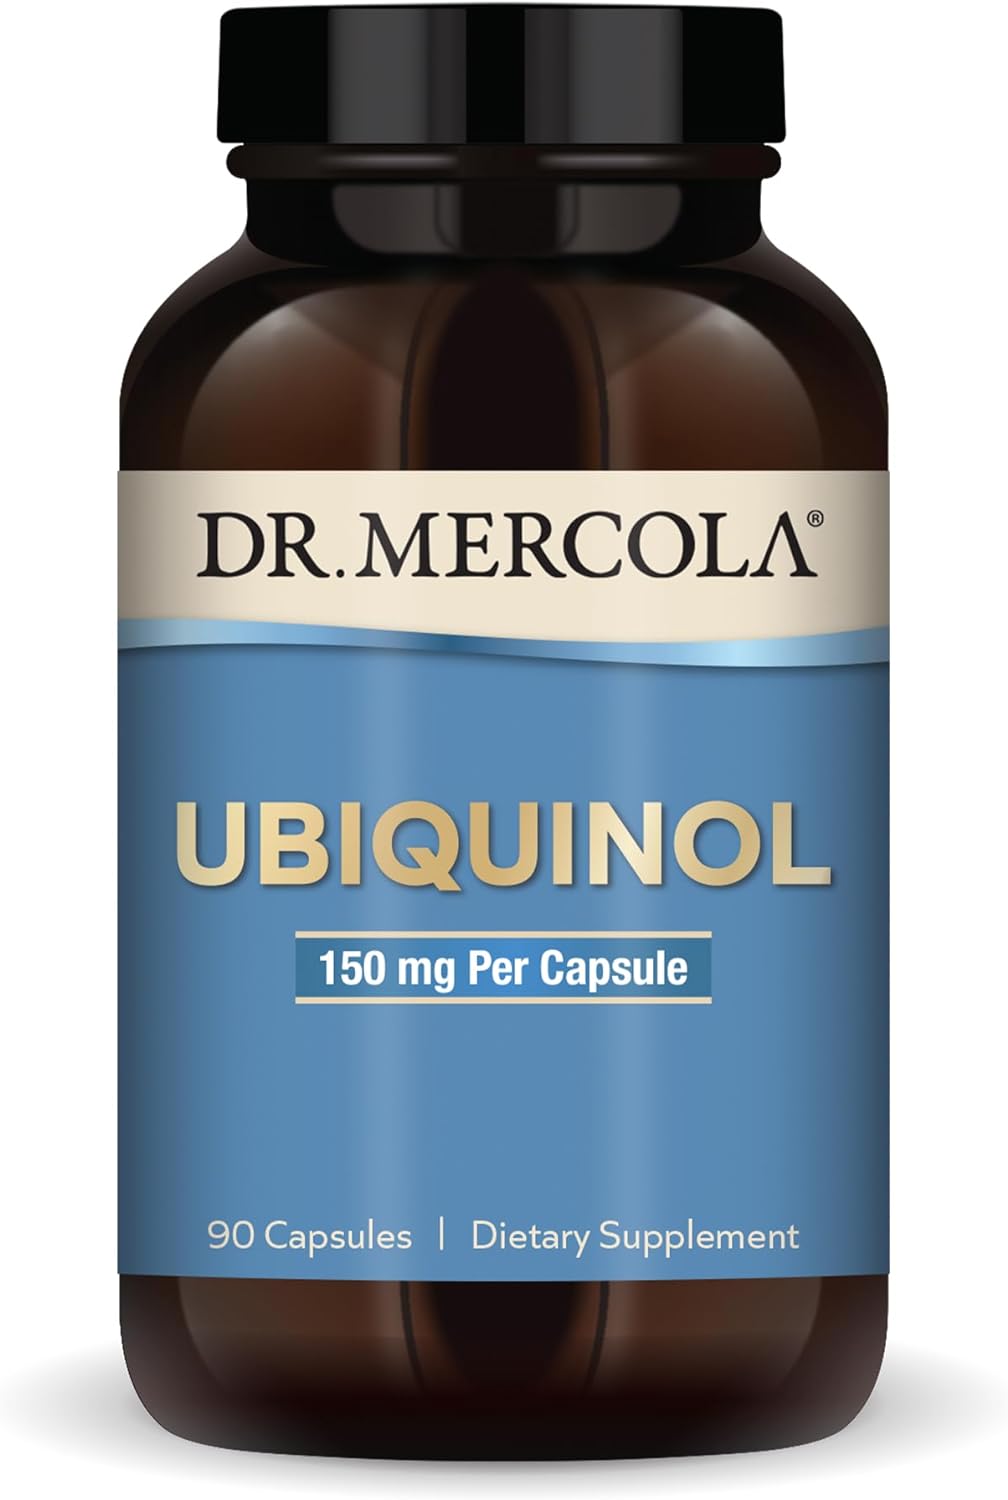 Dr. Mercola Ubiquinol 150 mg, 90 Servings (90 Capsules), Dietary Supplement, Supports Energy Production, Non-GMO